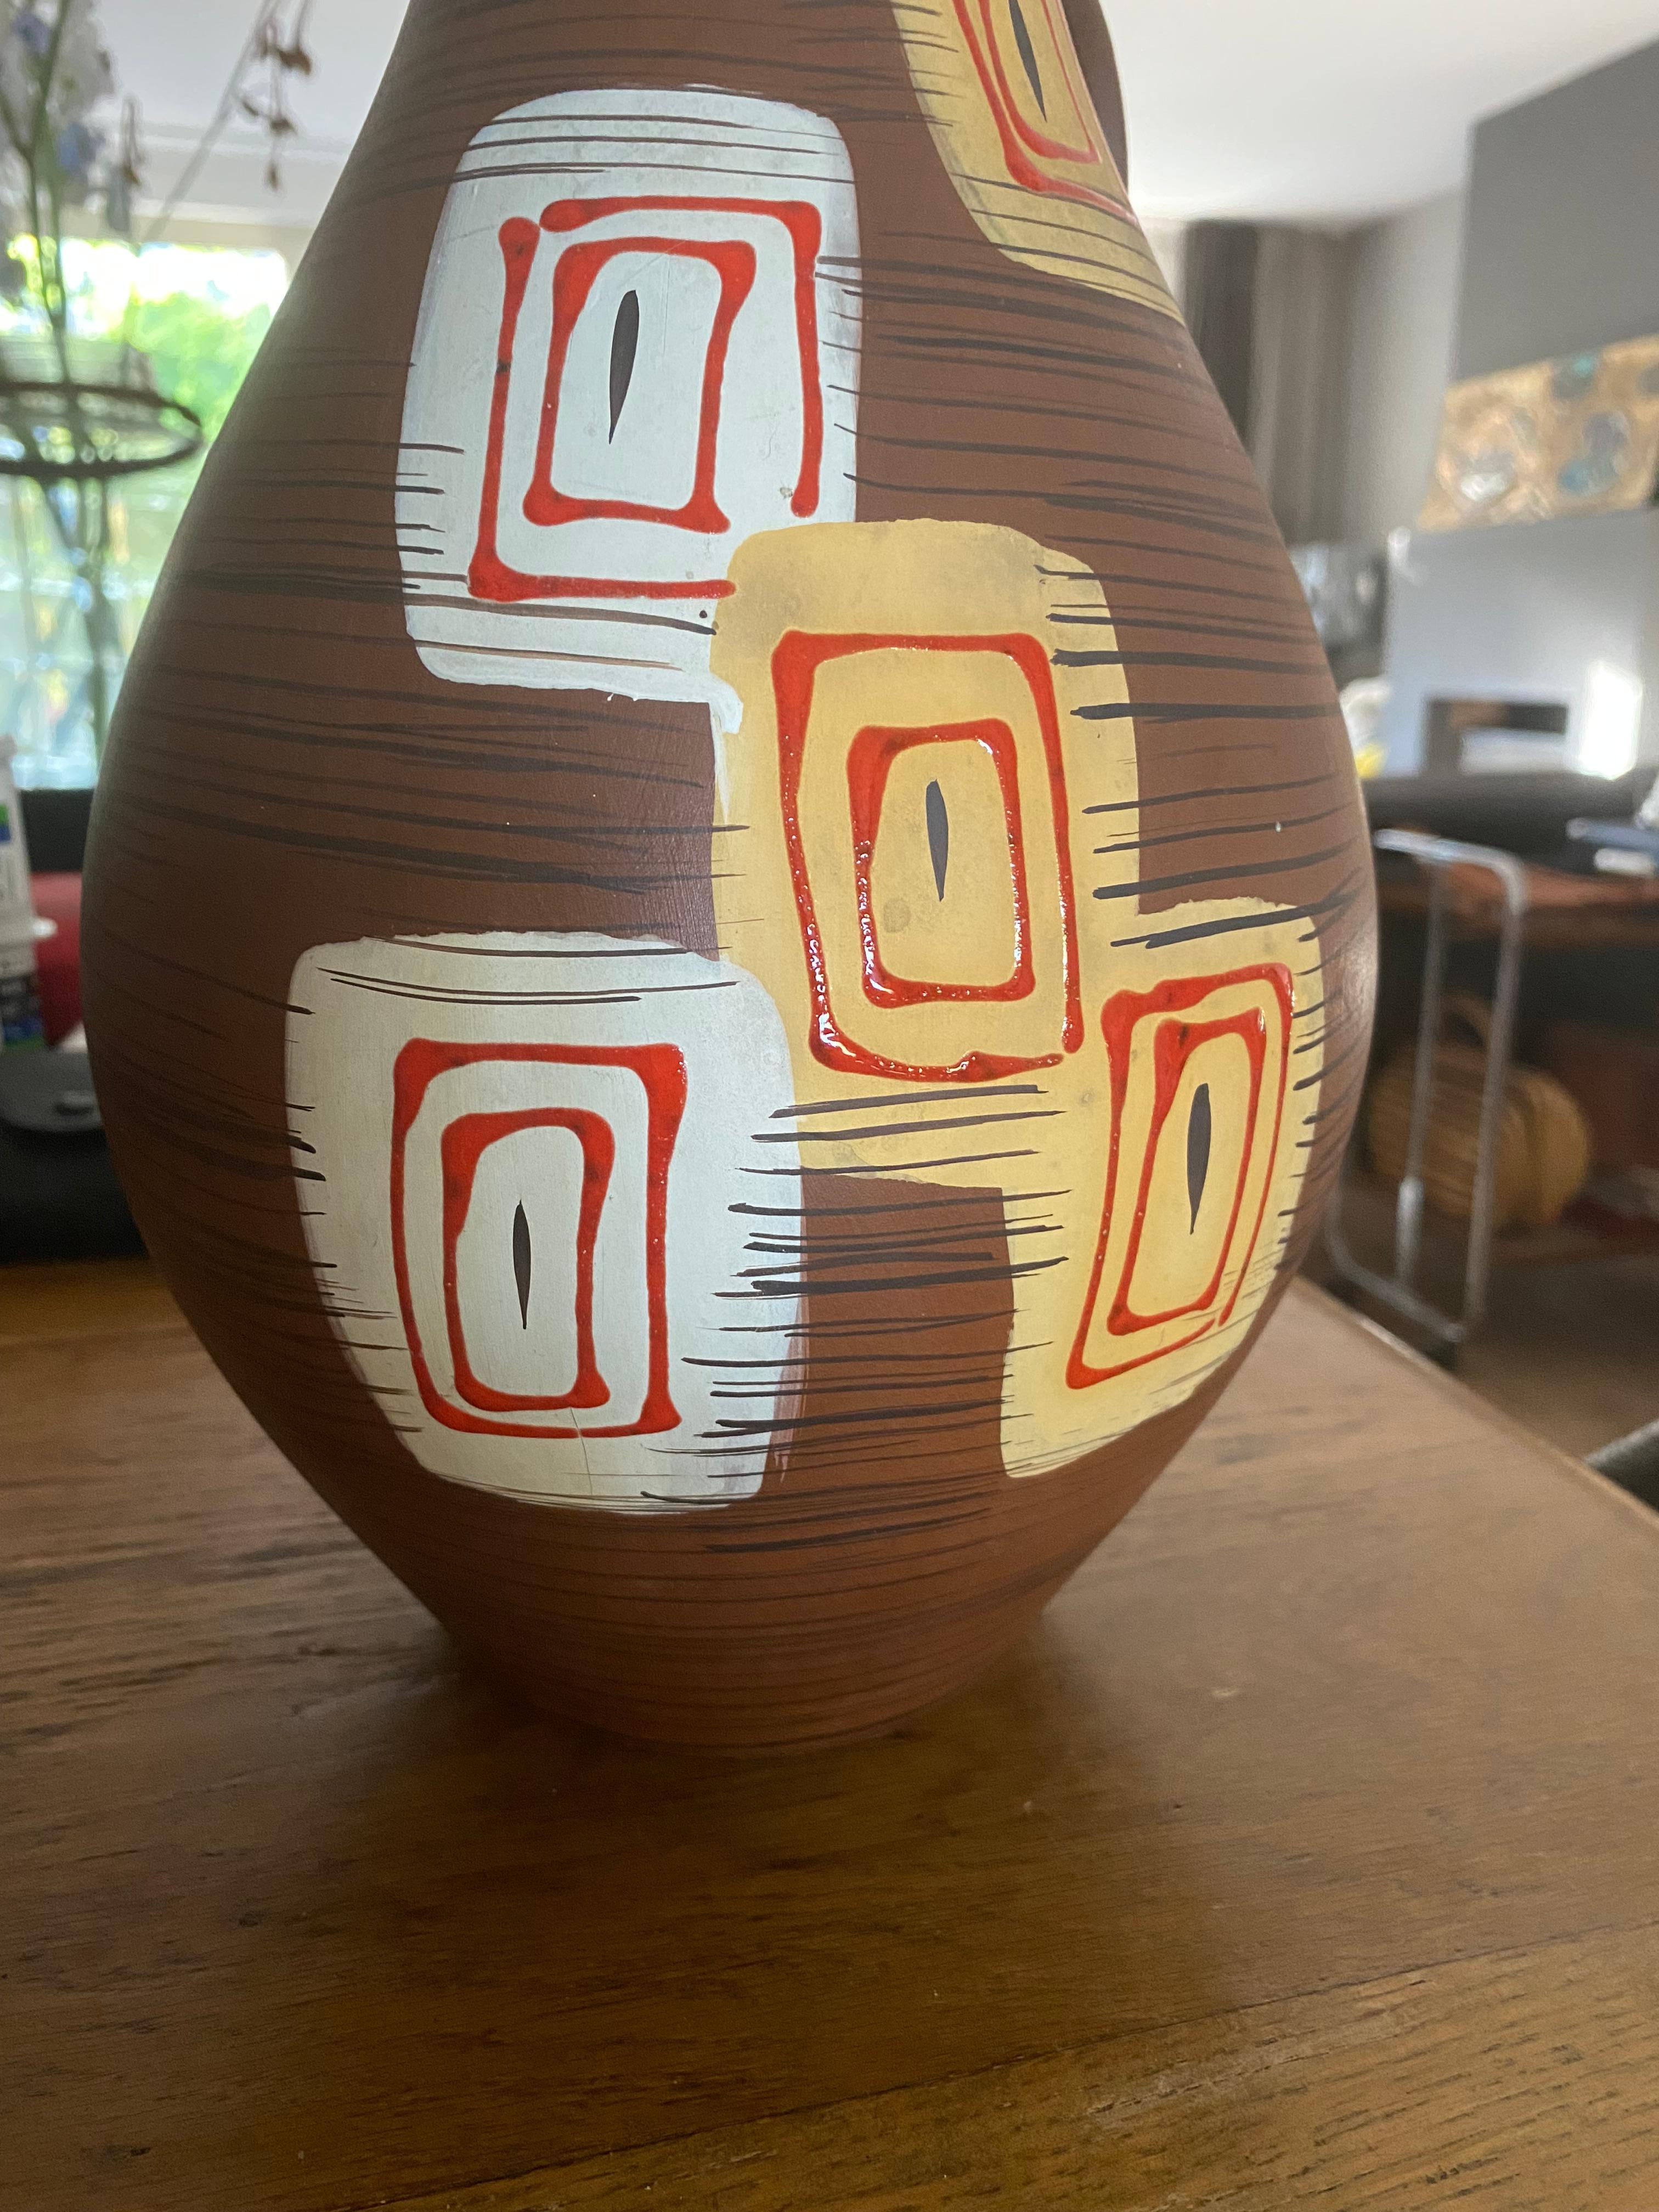 Beautiful Sixties vase from the quality items maker Carstens Keramik.